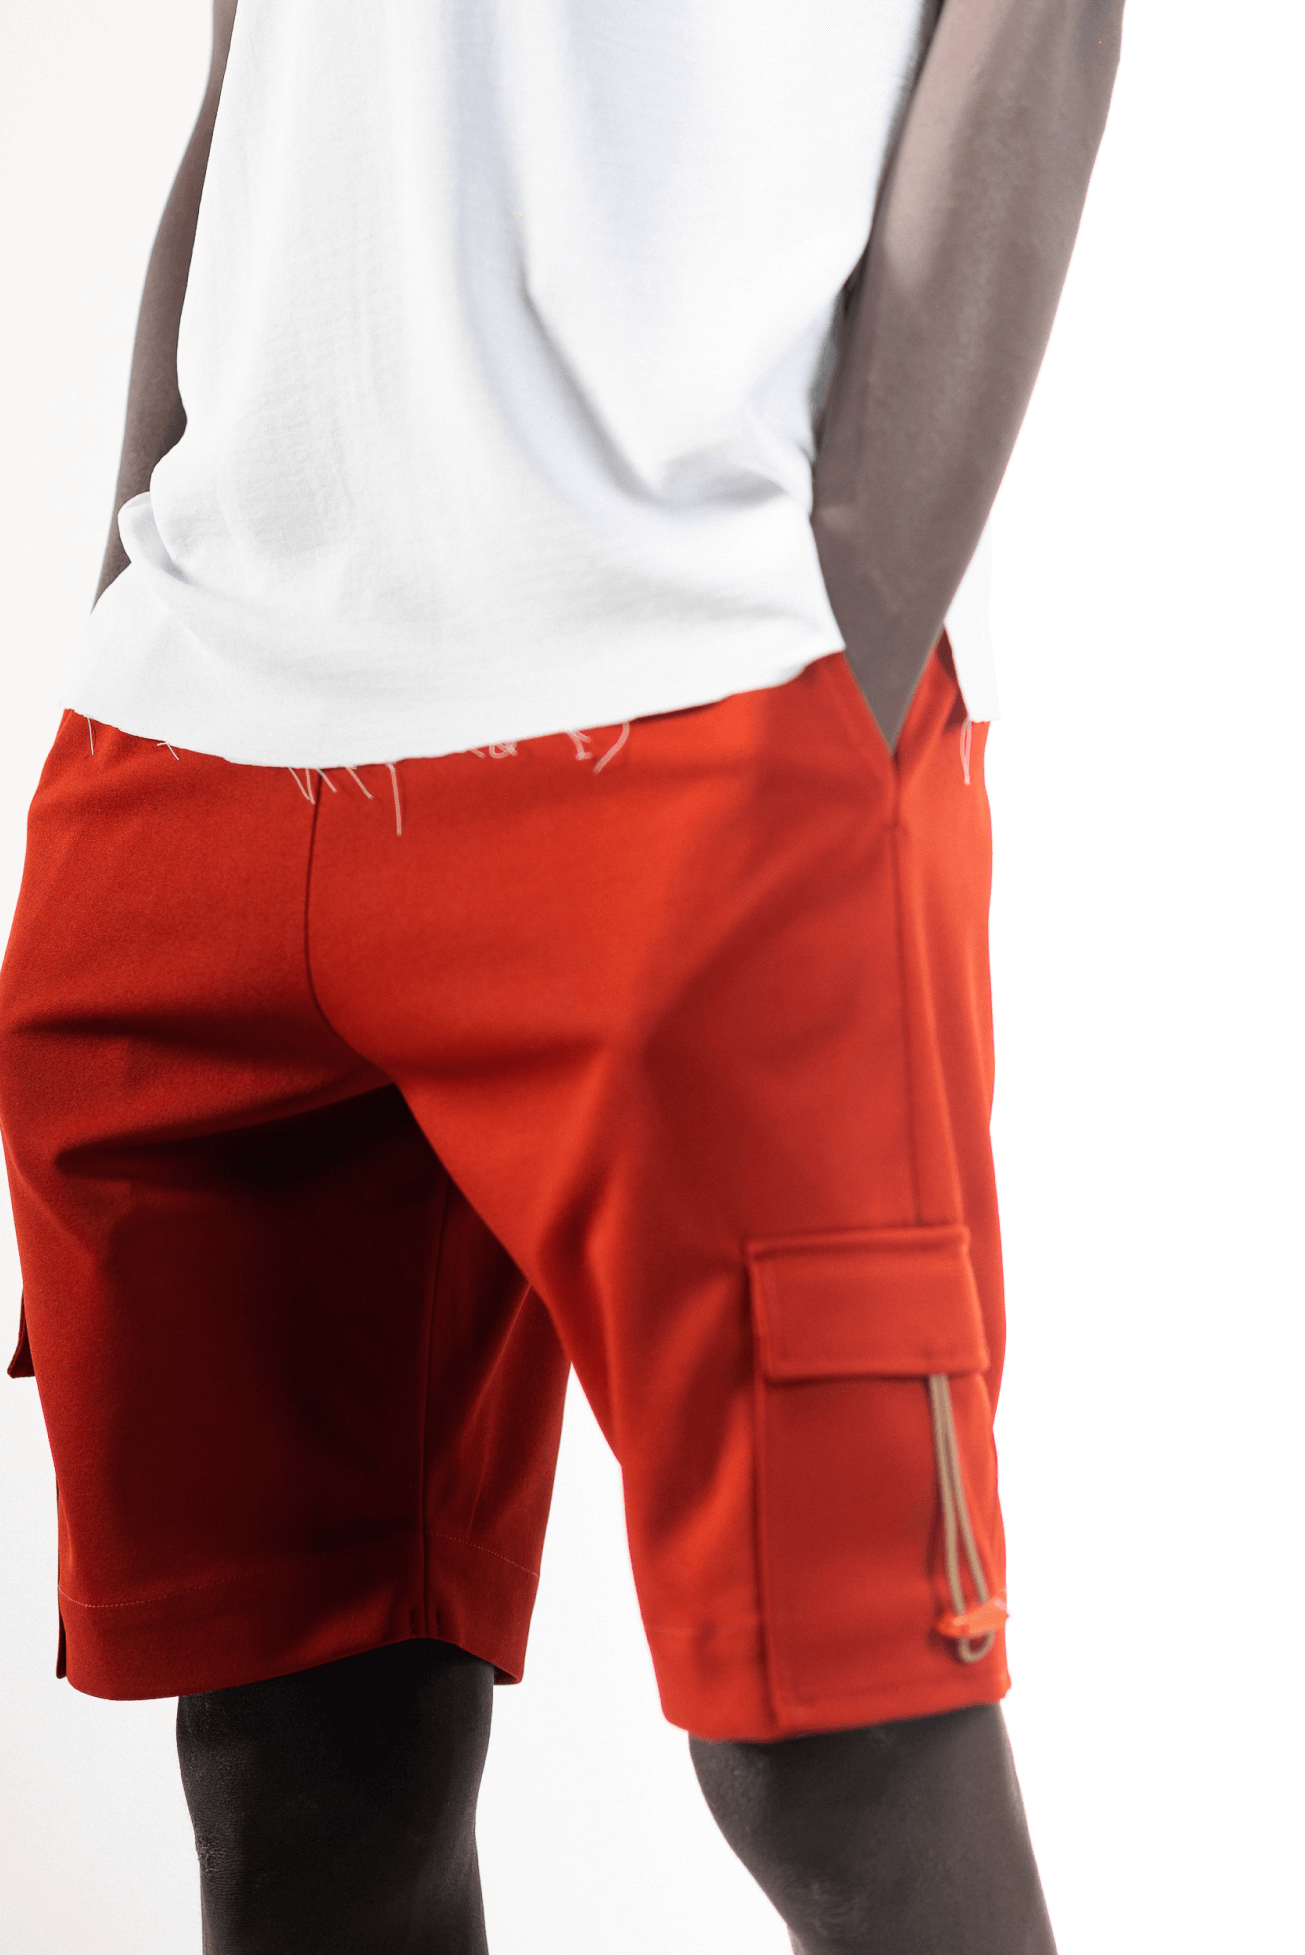 NC Jersey Shorts - Trousers, Pants & Shorts by NC Nairobi. Shop on Arrai now! Elevate your style with ease with Arrai's NC Nairobi Men's and Women's Jersey Shorts. Breathable matte material and a loose fit make them comfortable, while an elastic waistline